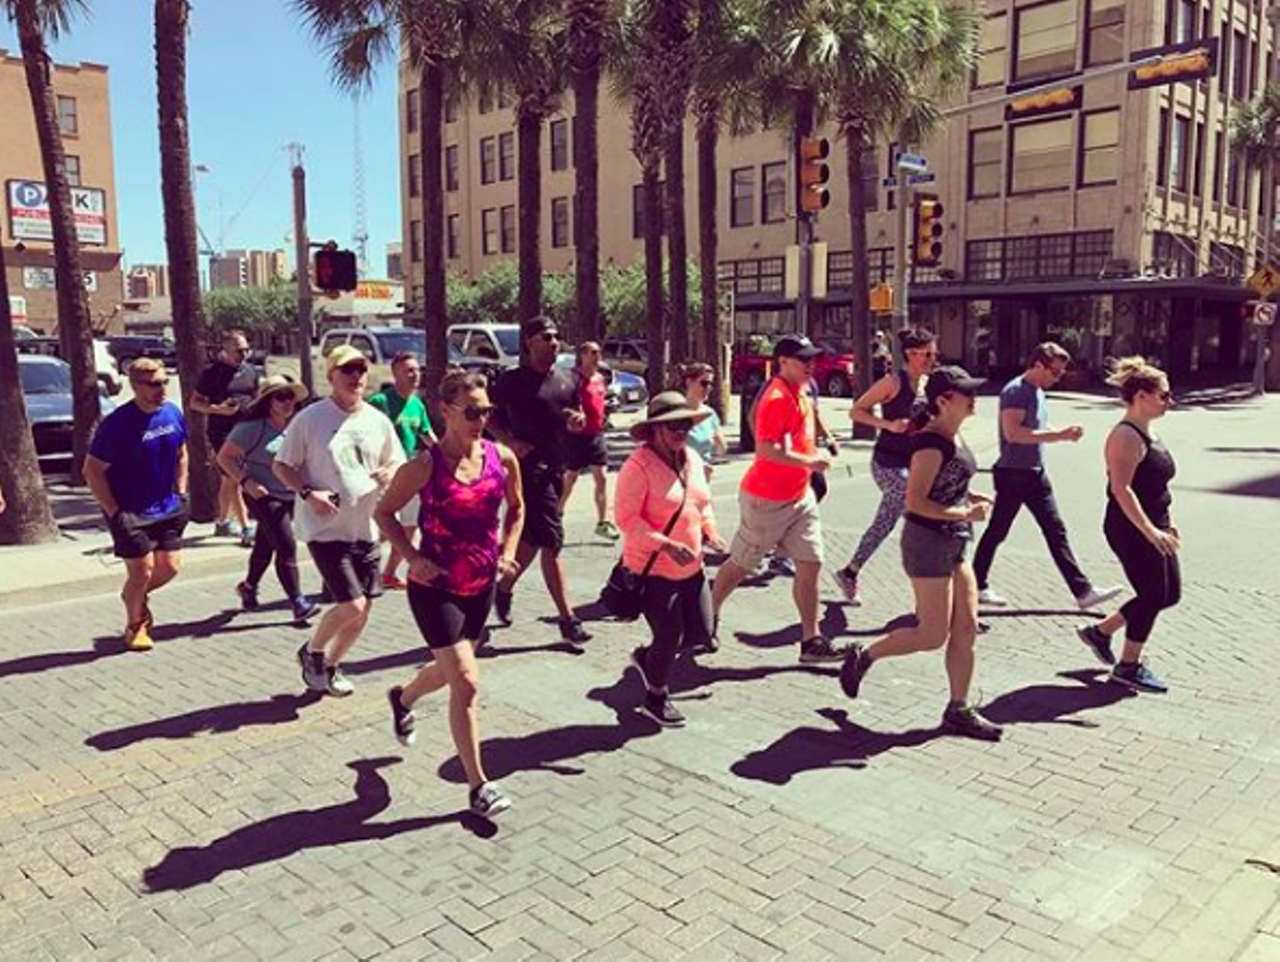 Join the pack for River City Run
1004 S St Mary's St, (210) 201-3786, rivercityrunsa.com
Have you lived in San Antonio your whole life (or at least a good portion of it) but never played tourist? Skip the stuffy bus tour and get active while learning about the Alamo City. River City Run offers just that – seeing SA by foot. This tour is appropriate for runners and families alike, so don’t think you’re signing yourself up for a marathon.
Photo via Instagram / rivercityrunsa